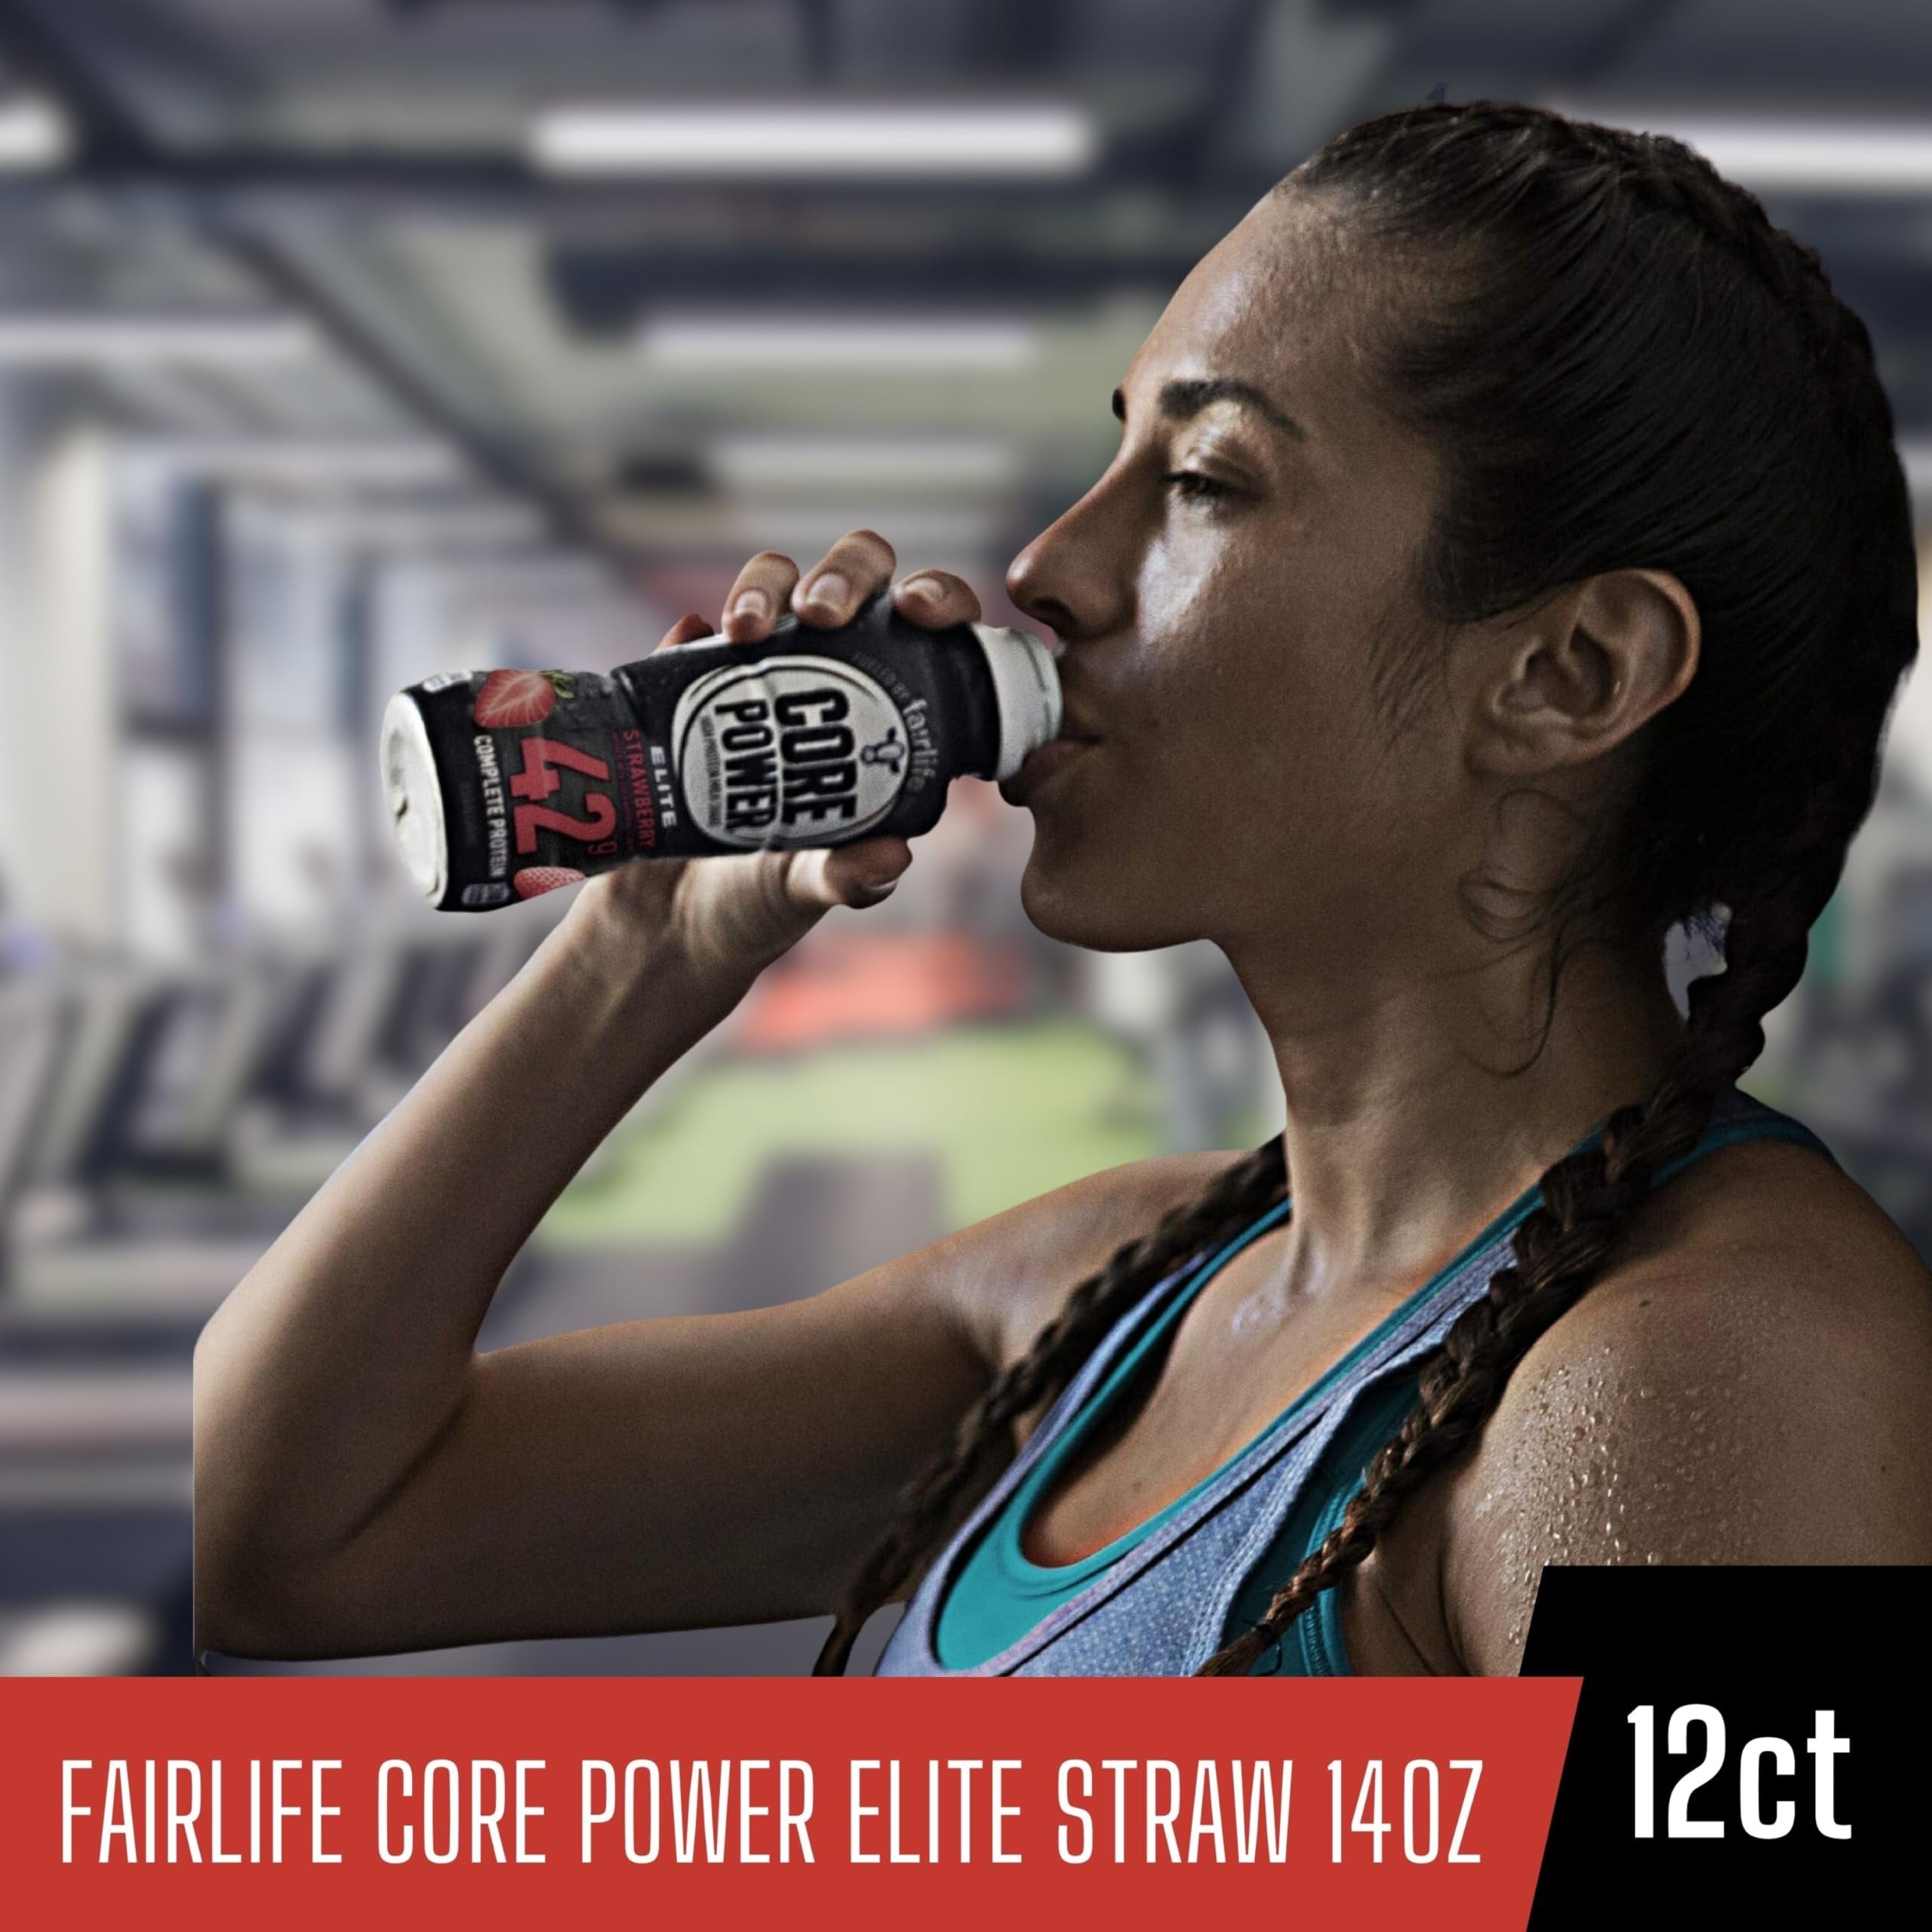 Core Power Fairlife Elite 42g High Protein Milk Shake - Kosher, Strawberry Protein Shake for Workout Recovery - 14 Fl Oz (Pack of 12) & Multi-Purpose Key Chain